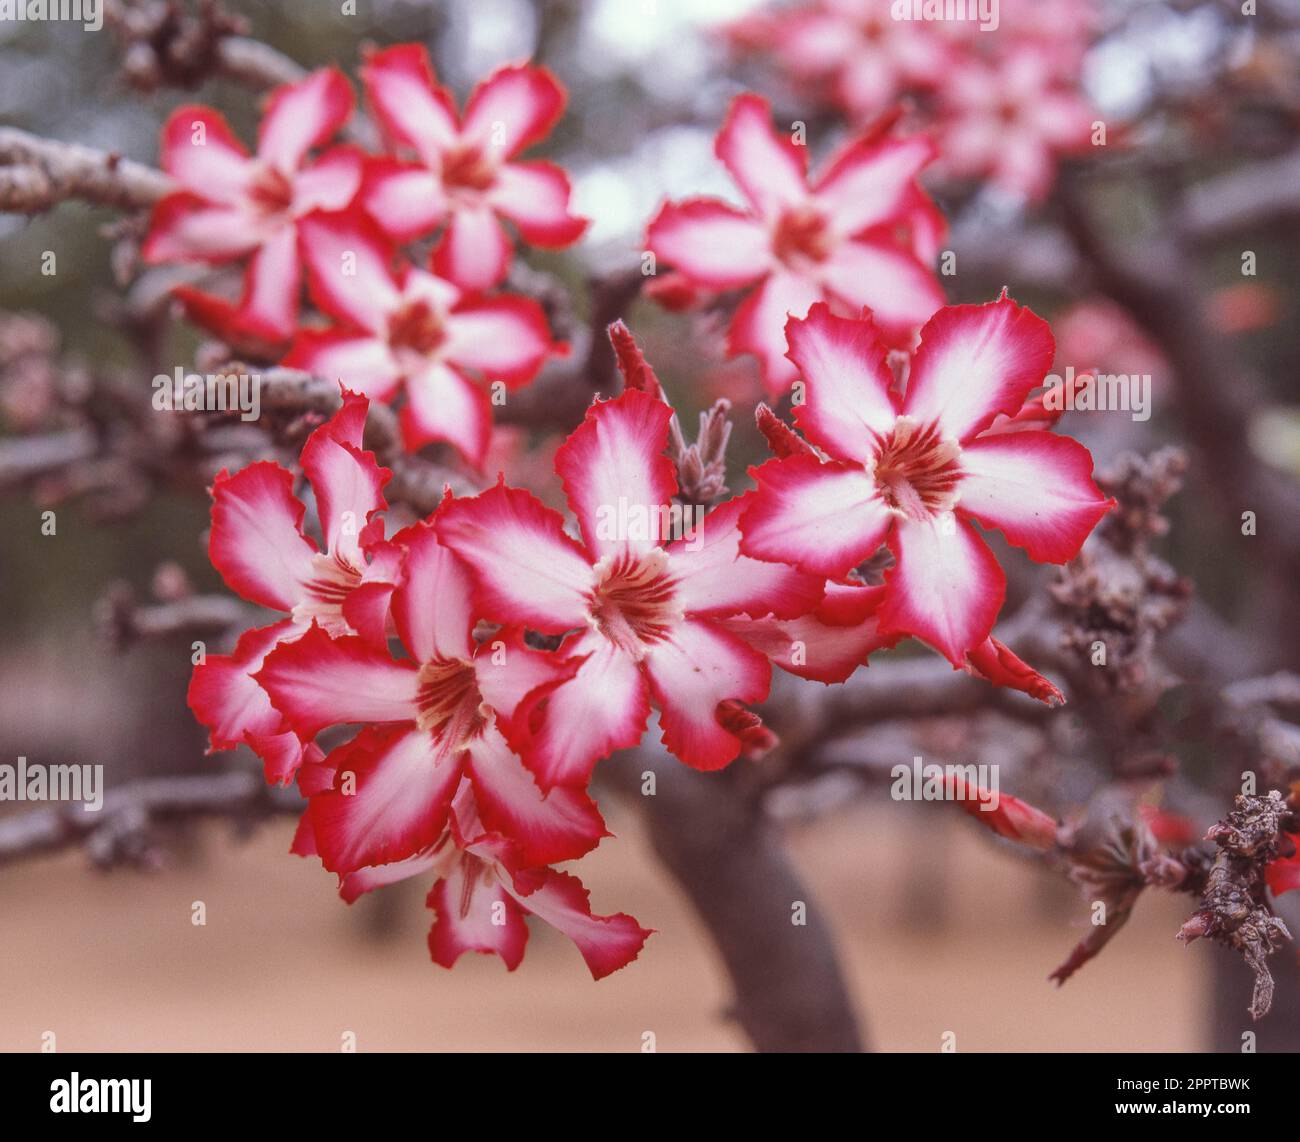 The Impala Lily (Adenium multiflorum) grows in northern South Africa and Swaziland, Mozambique and Zimbabwe, extending into Malawi and Zambia. Stock Photo